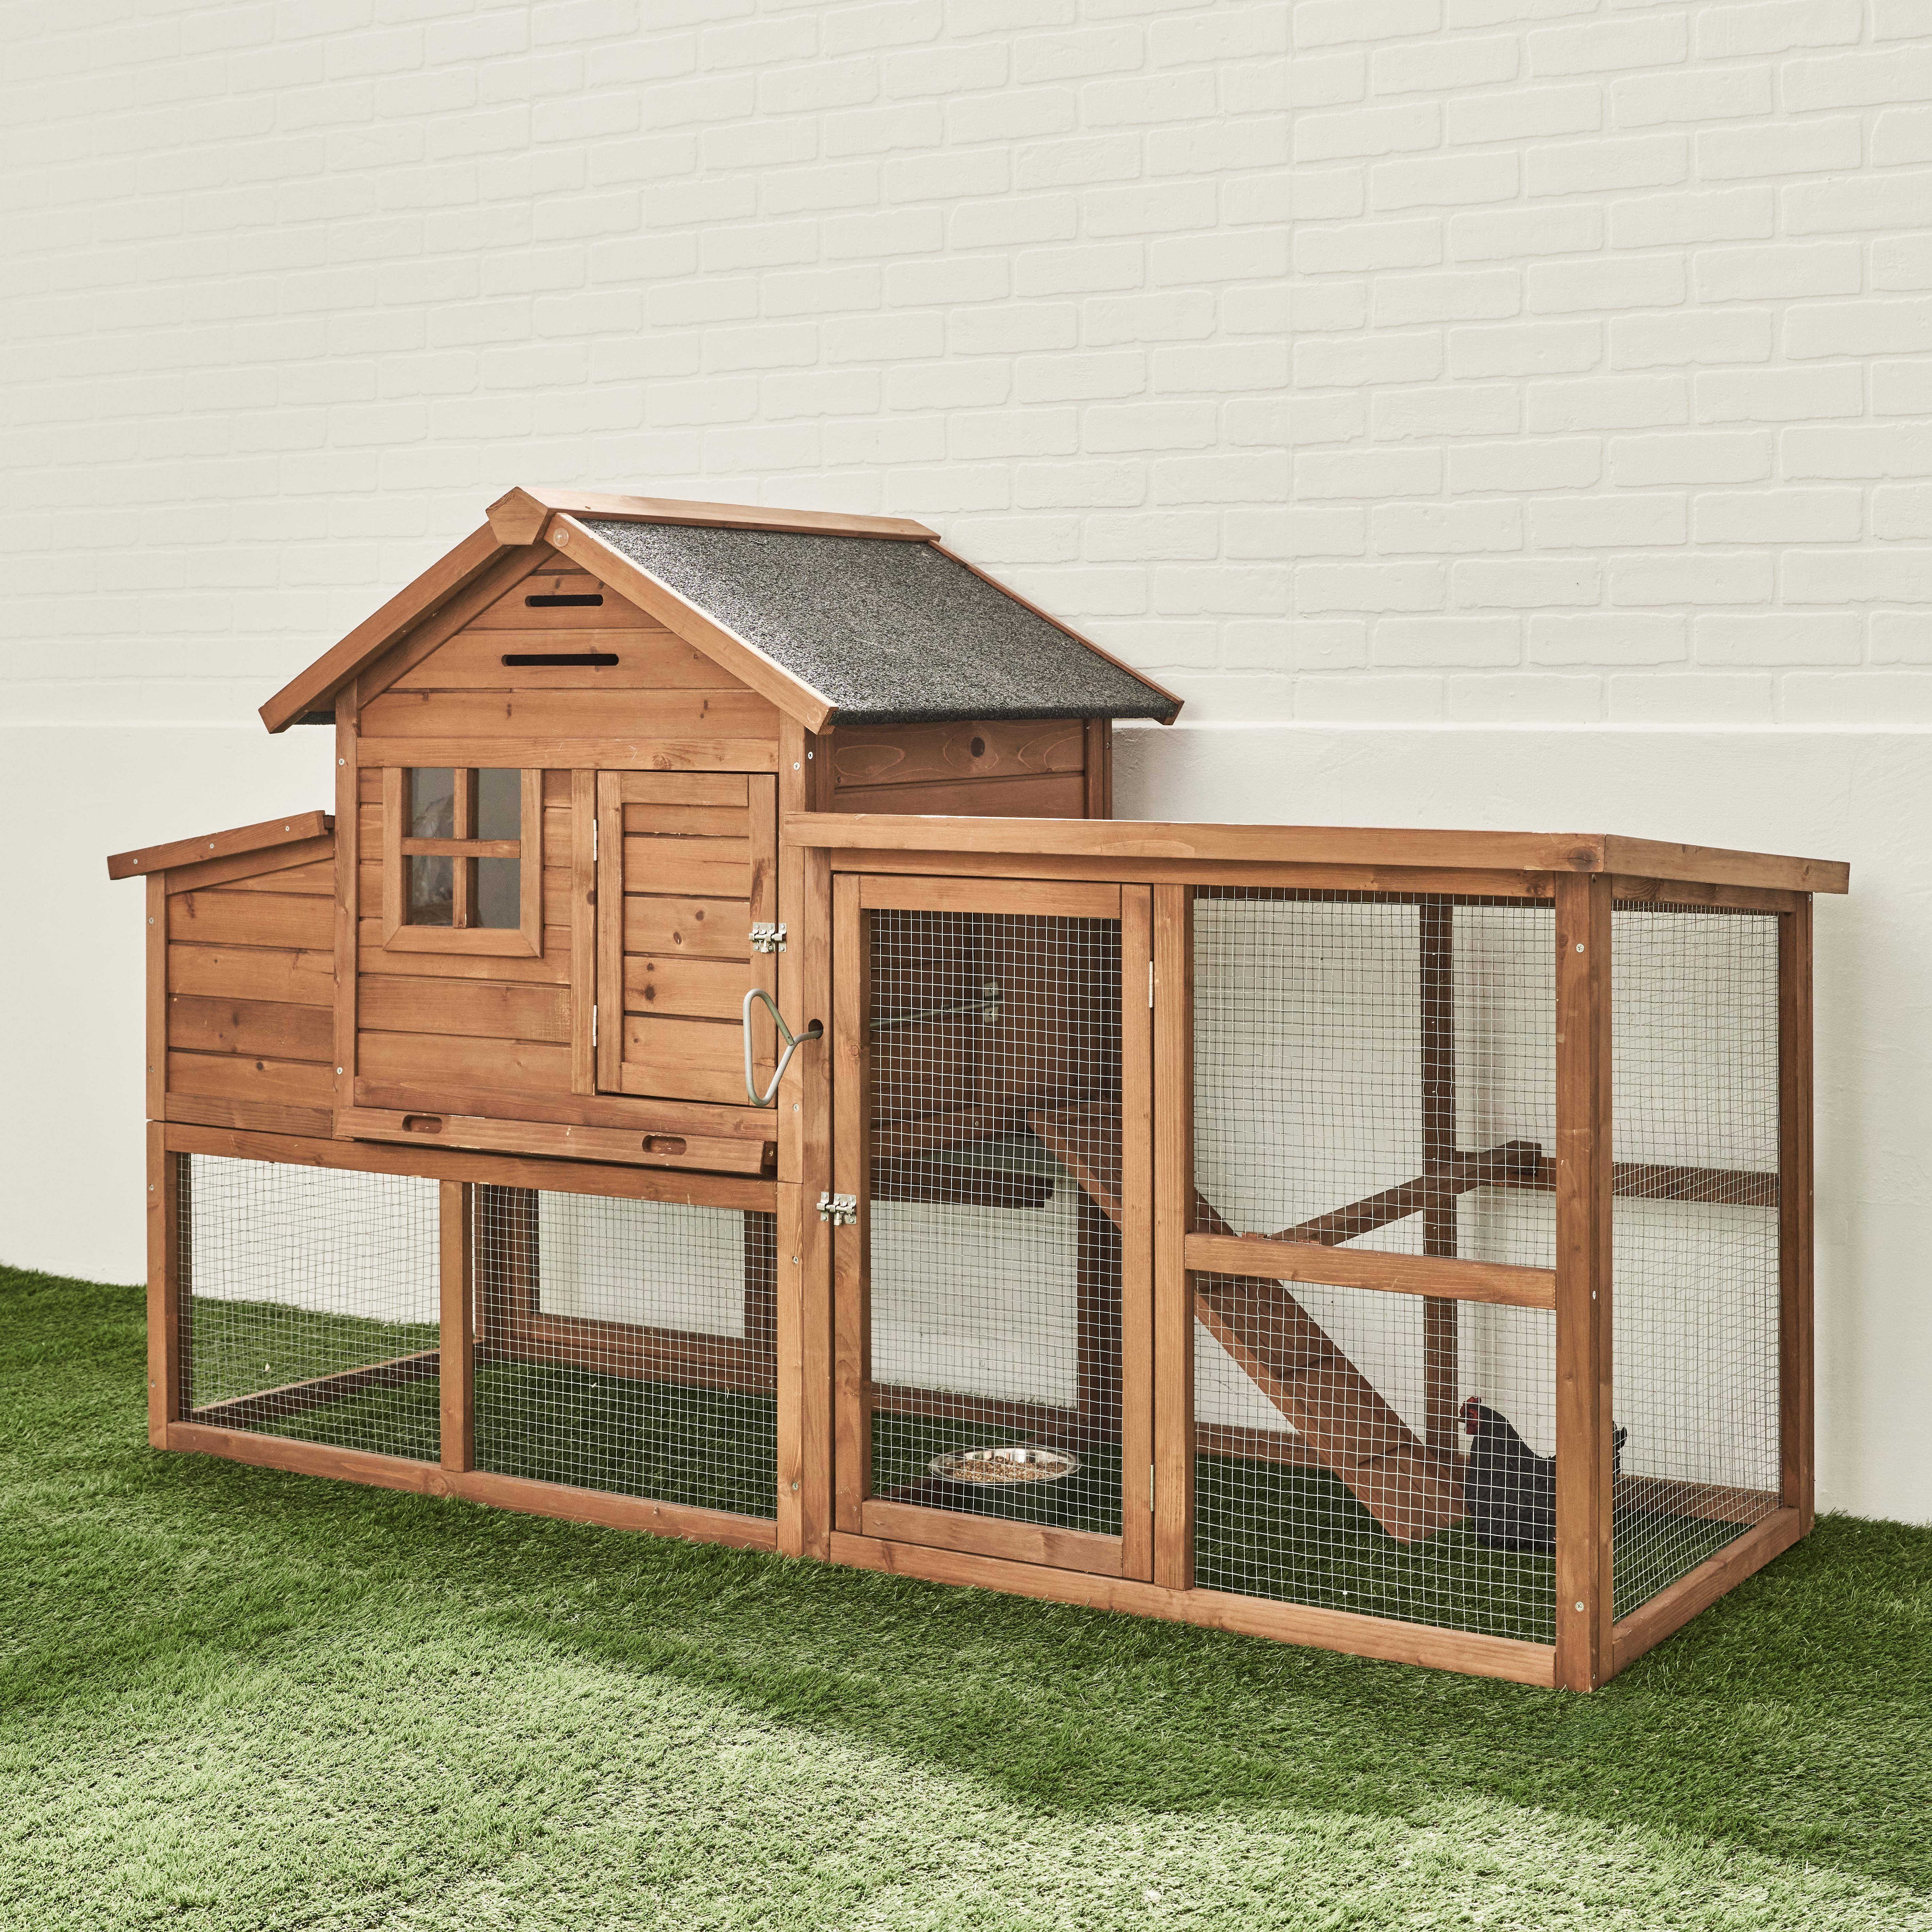 Wooden chicken coop for 4 chickens with nesting box, 195.5x75.5x116.5cm - Geline - Wood colour,sweeek,Photo1